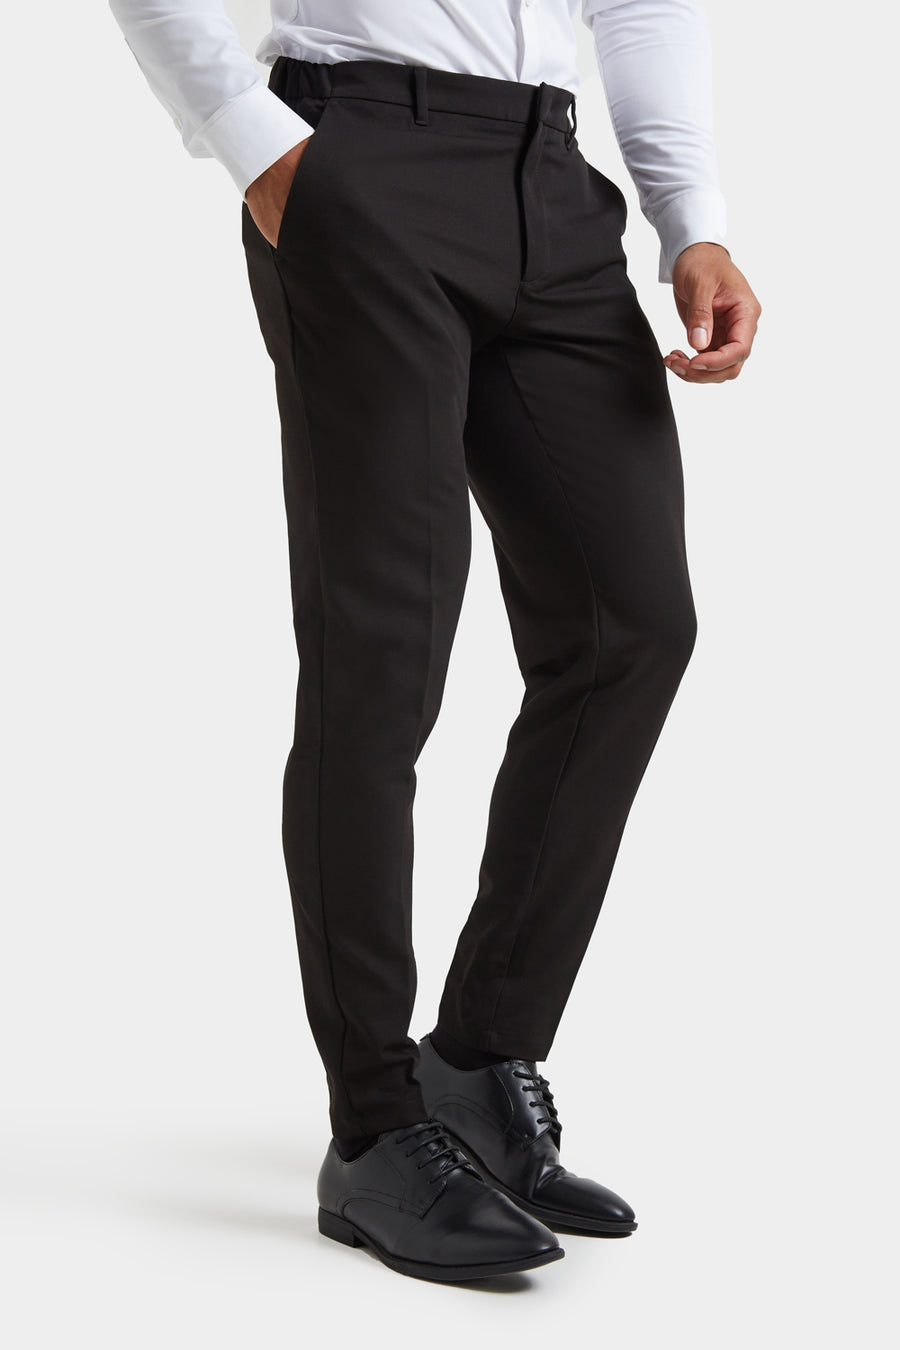 Athletic Fit Essential Pants in Black - TAILORED ATHLETE - USA